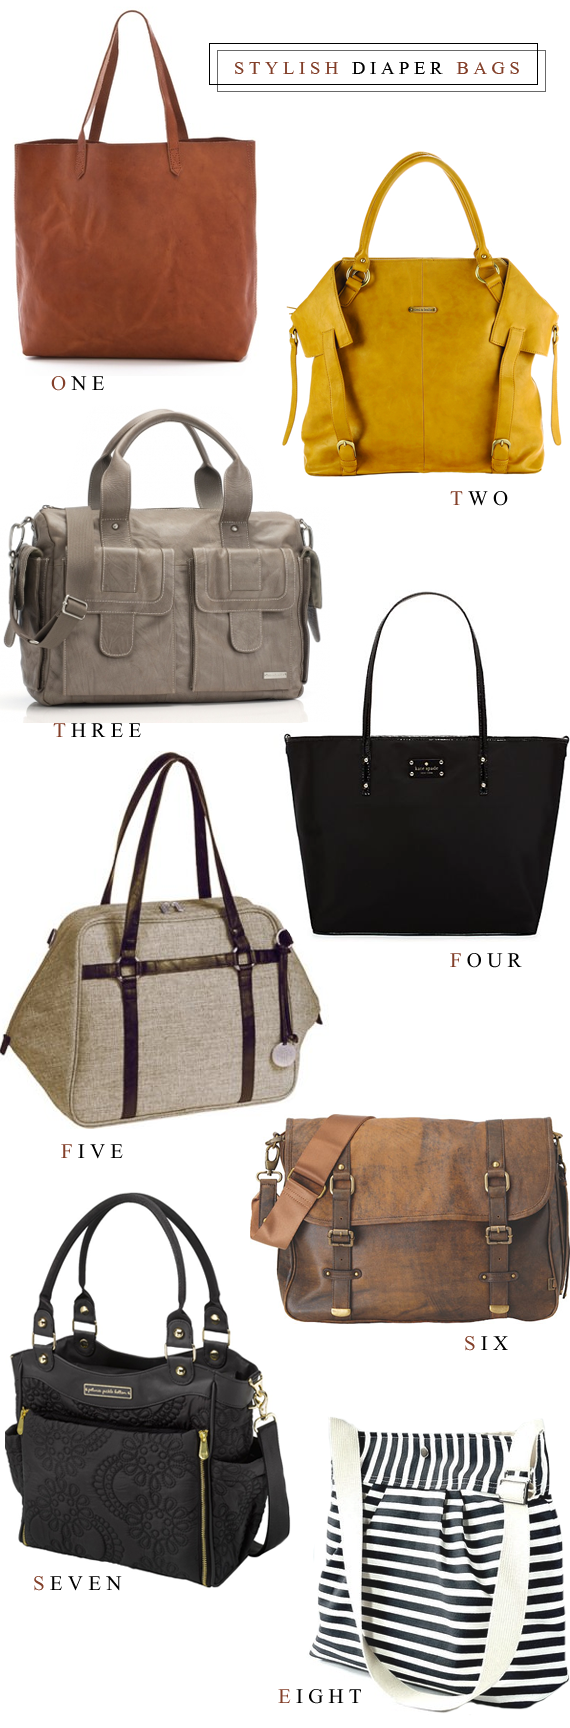 8 Stylish Diaper Bags // Bubby and Bean